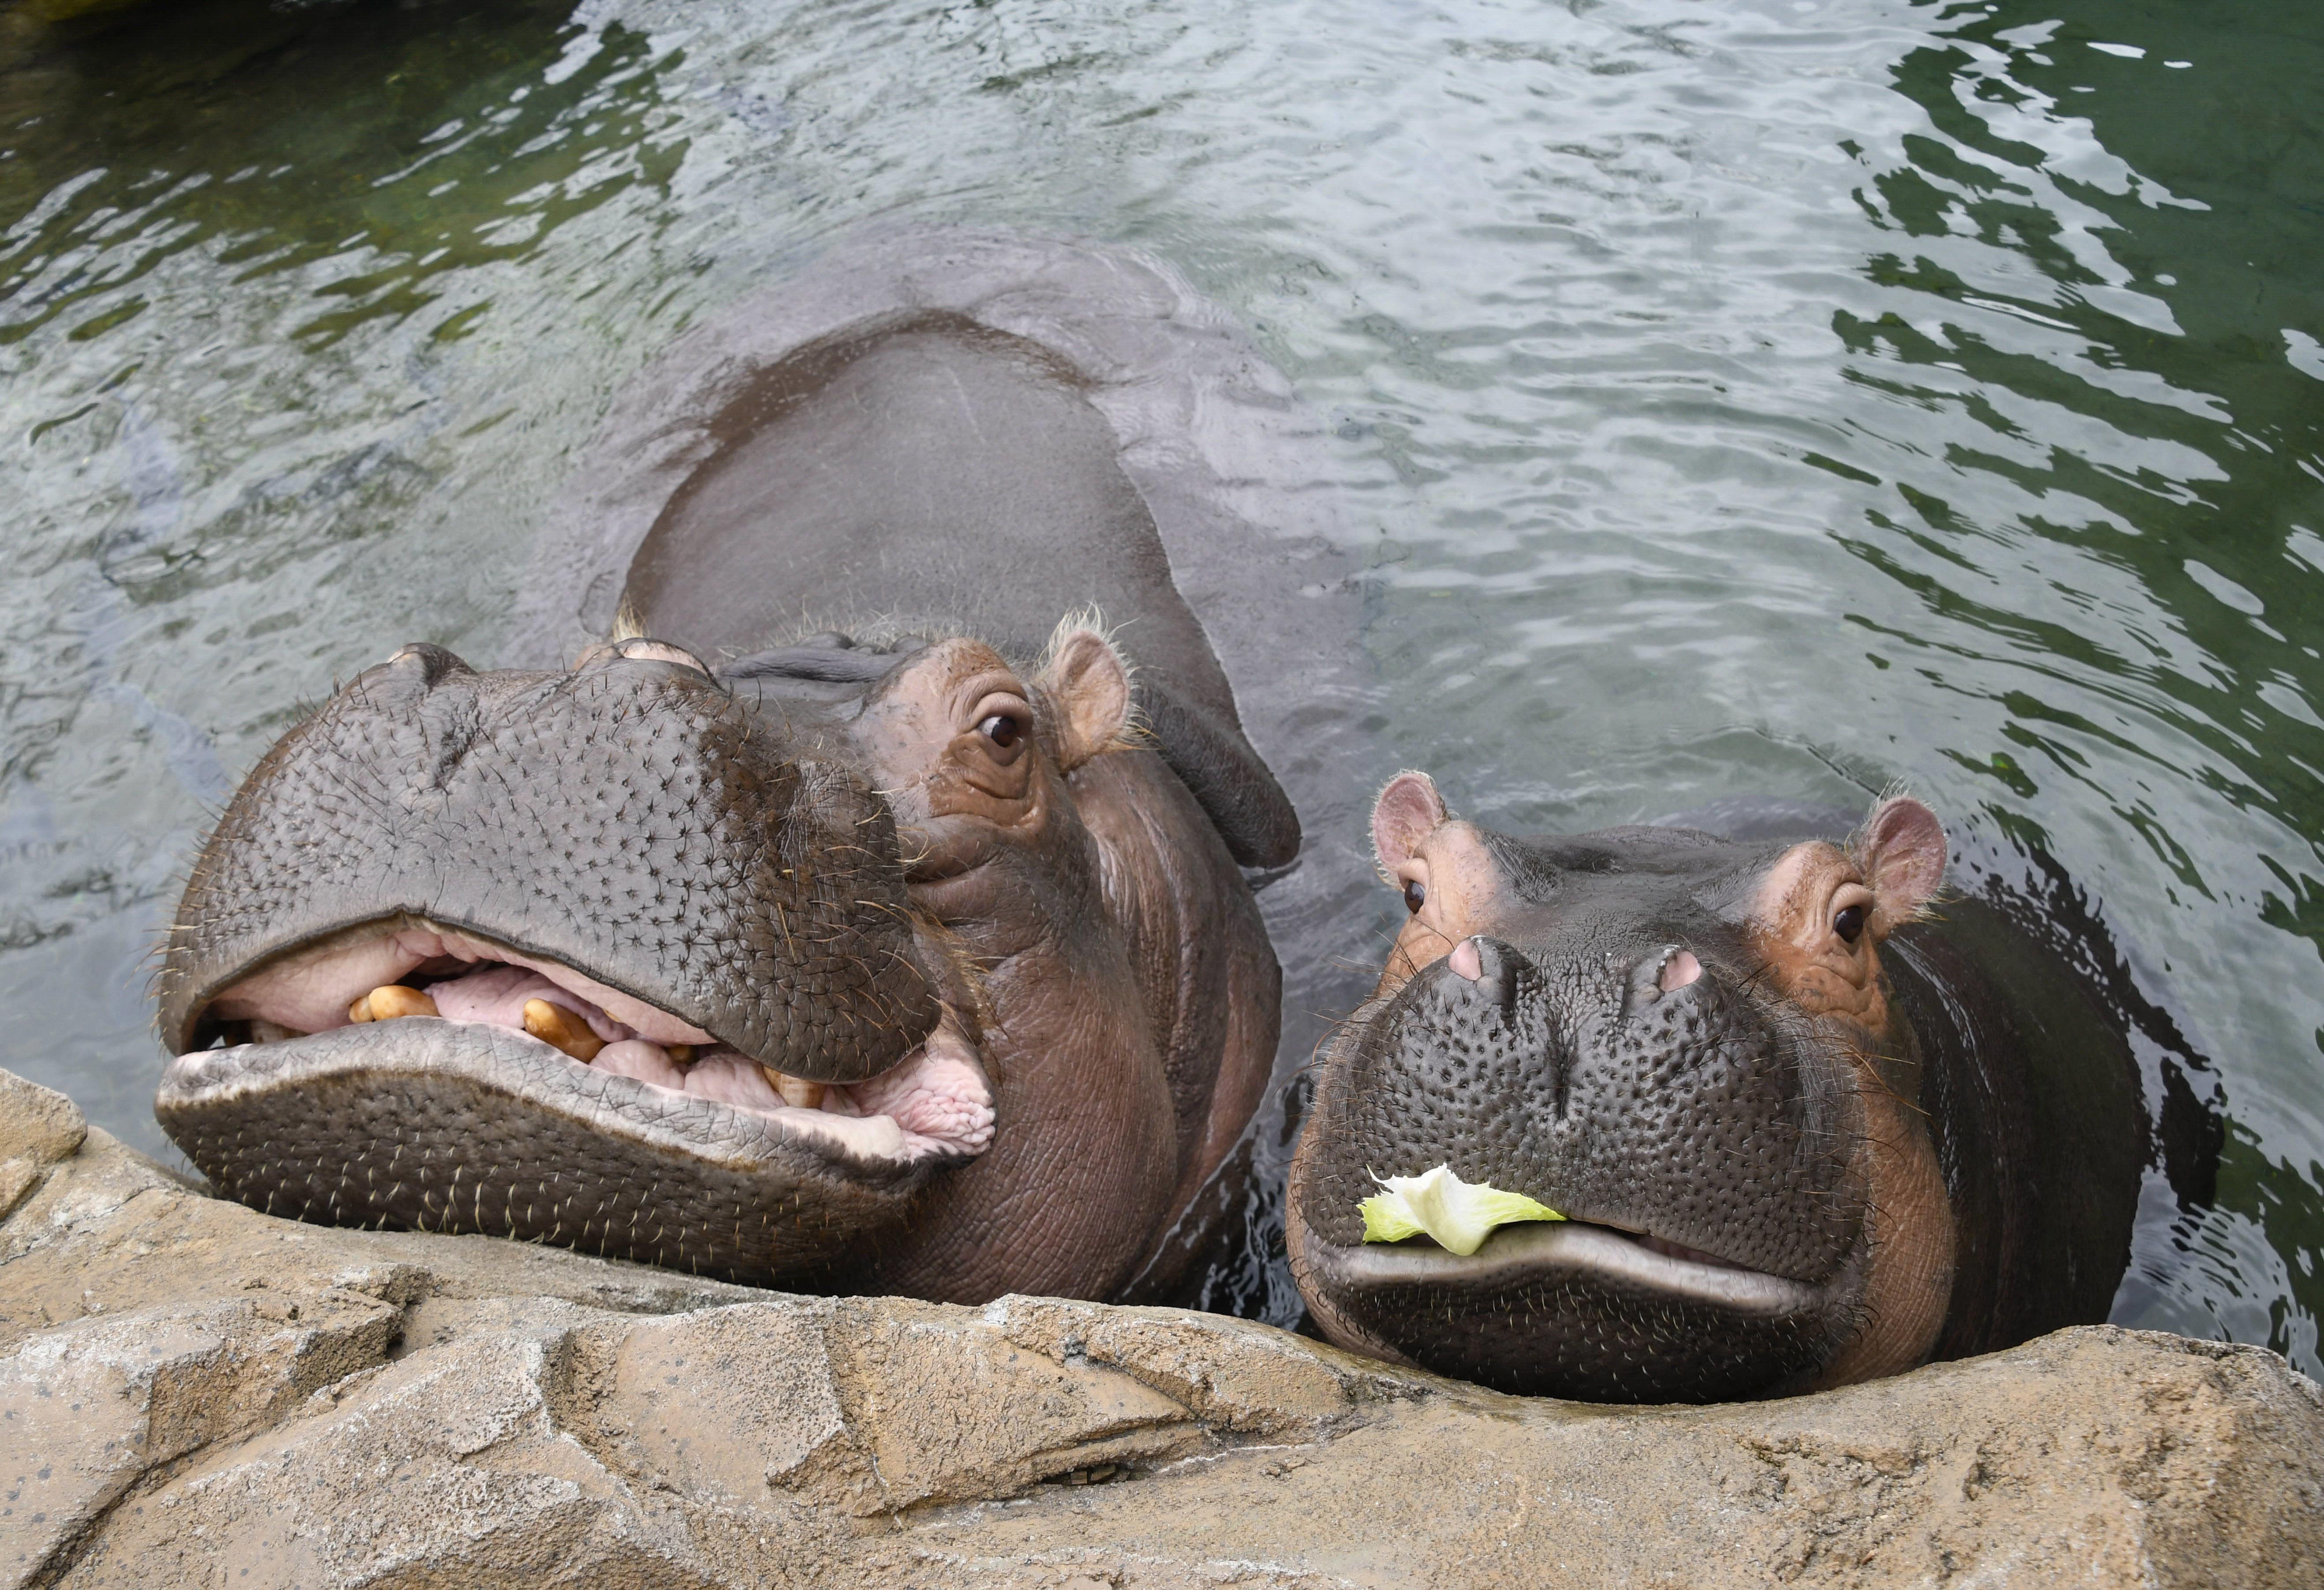 Bibi and Fiona during feeding time